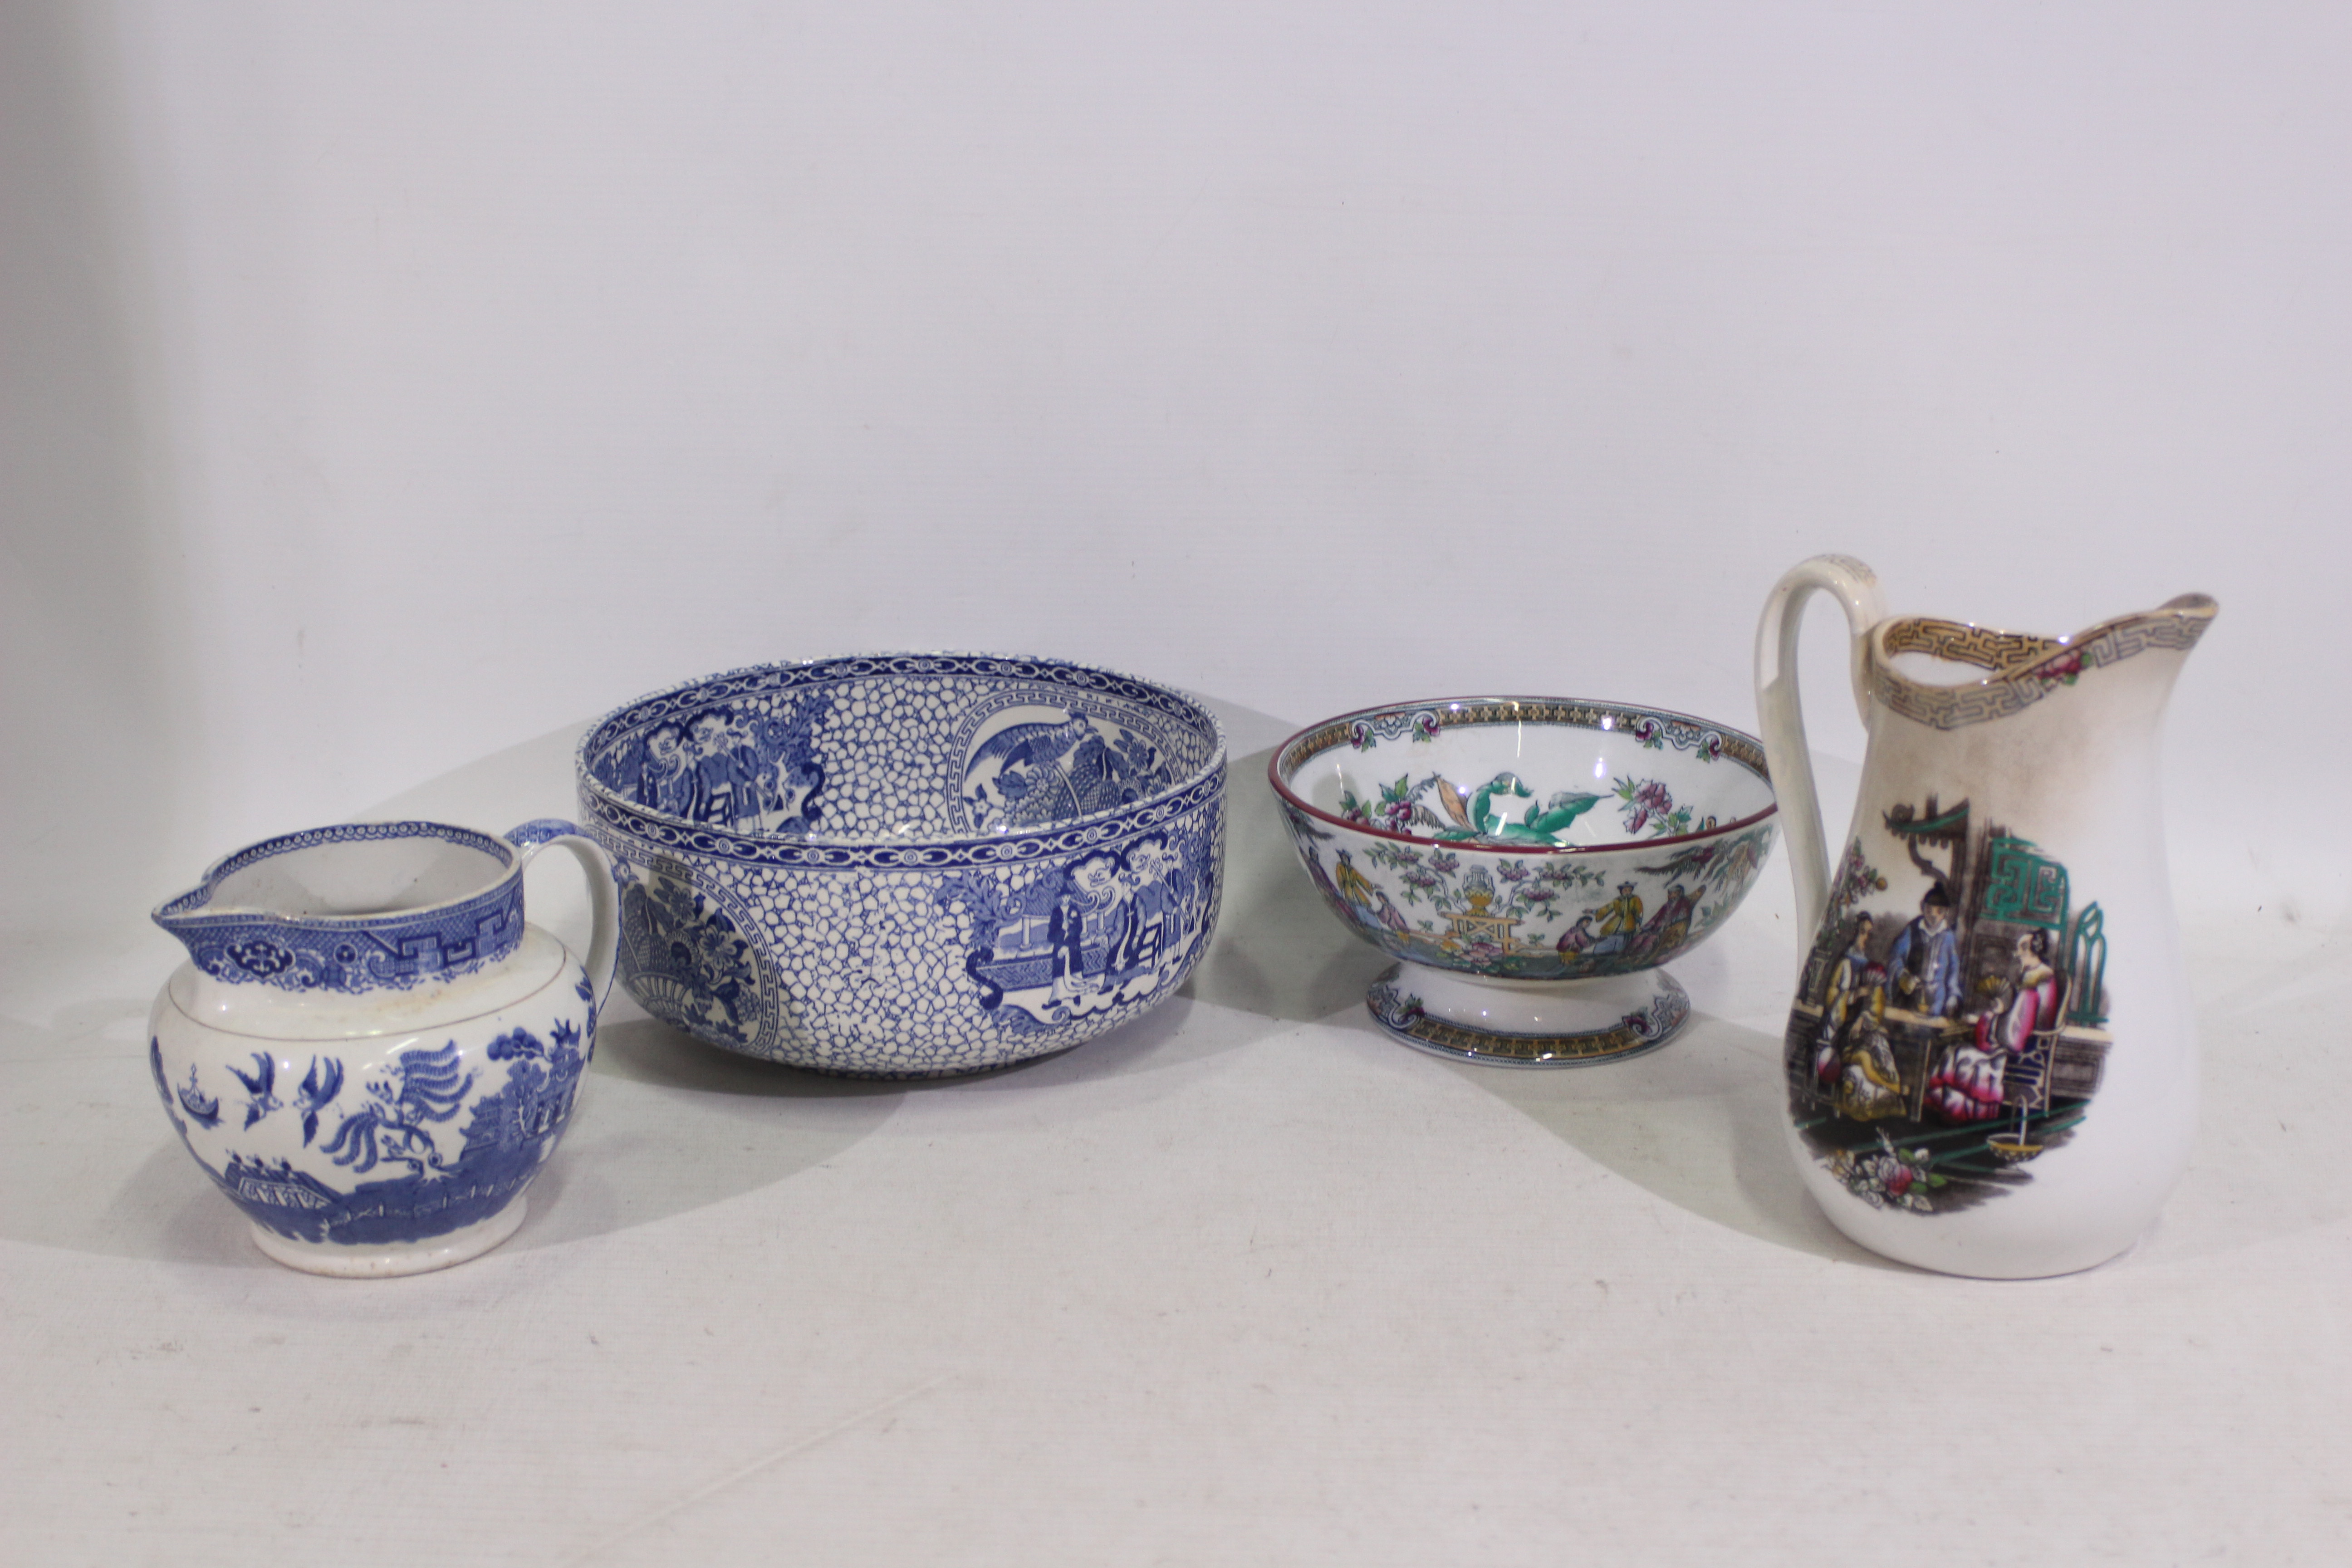 Pekin, Canton, W. Adams and Sons, Other - 4 x Asian ceramic pieces - Lot includes a Pekin bowl.